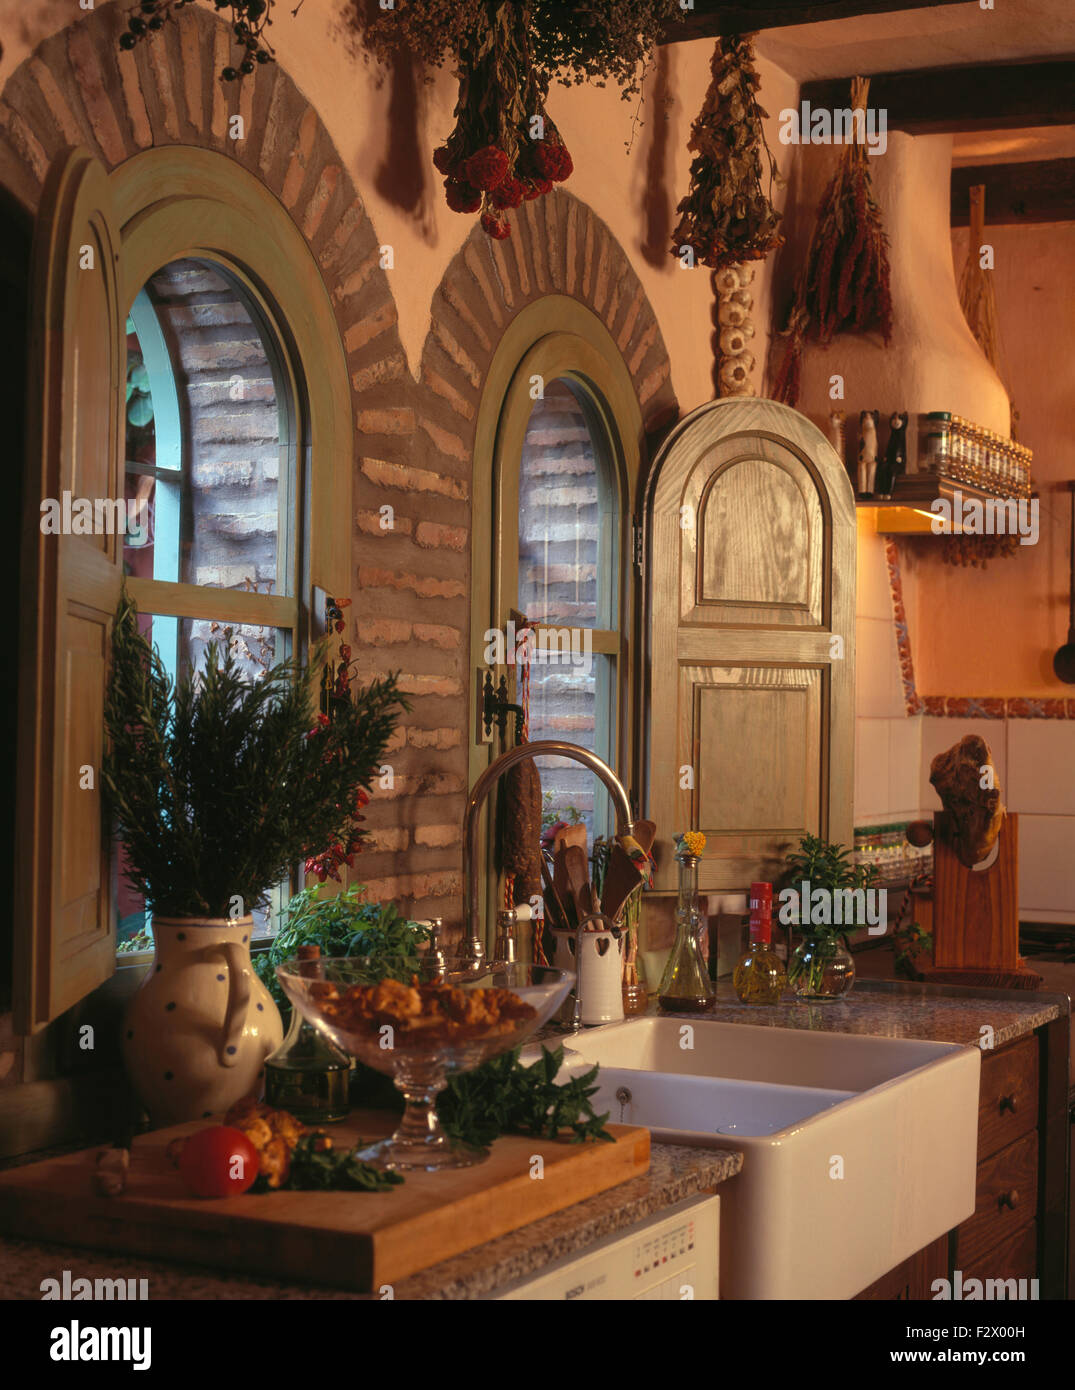 Wooden Shutters On Arched Windows Above Double Belfast Sink